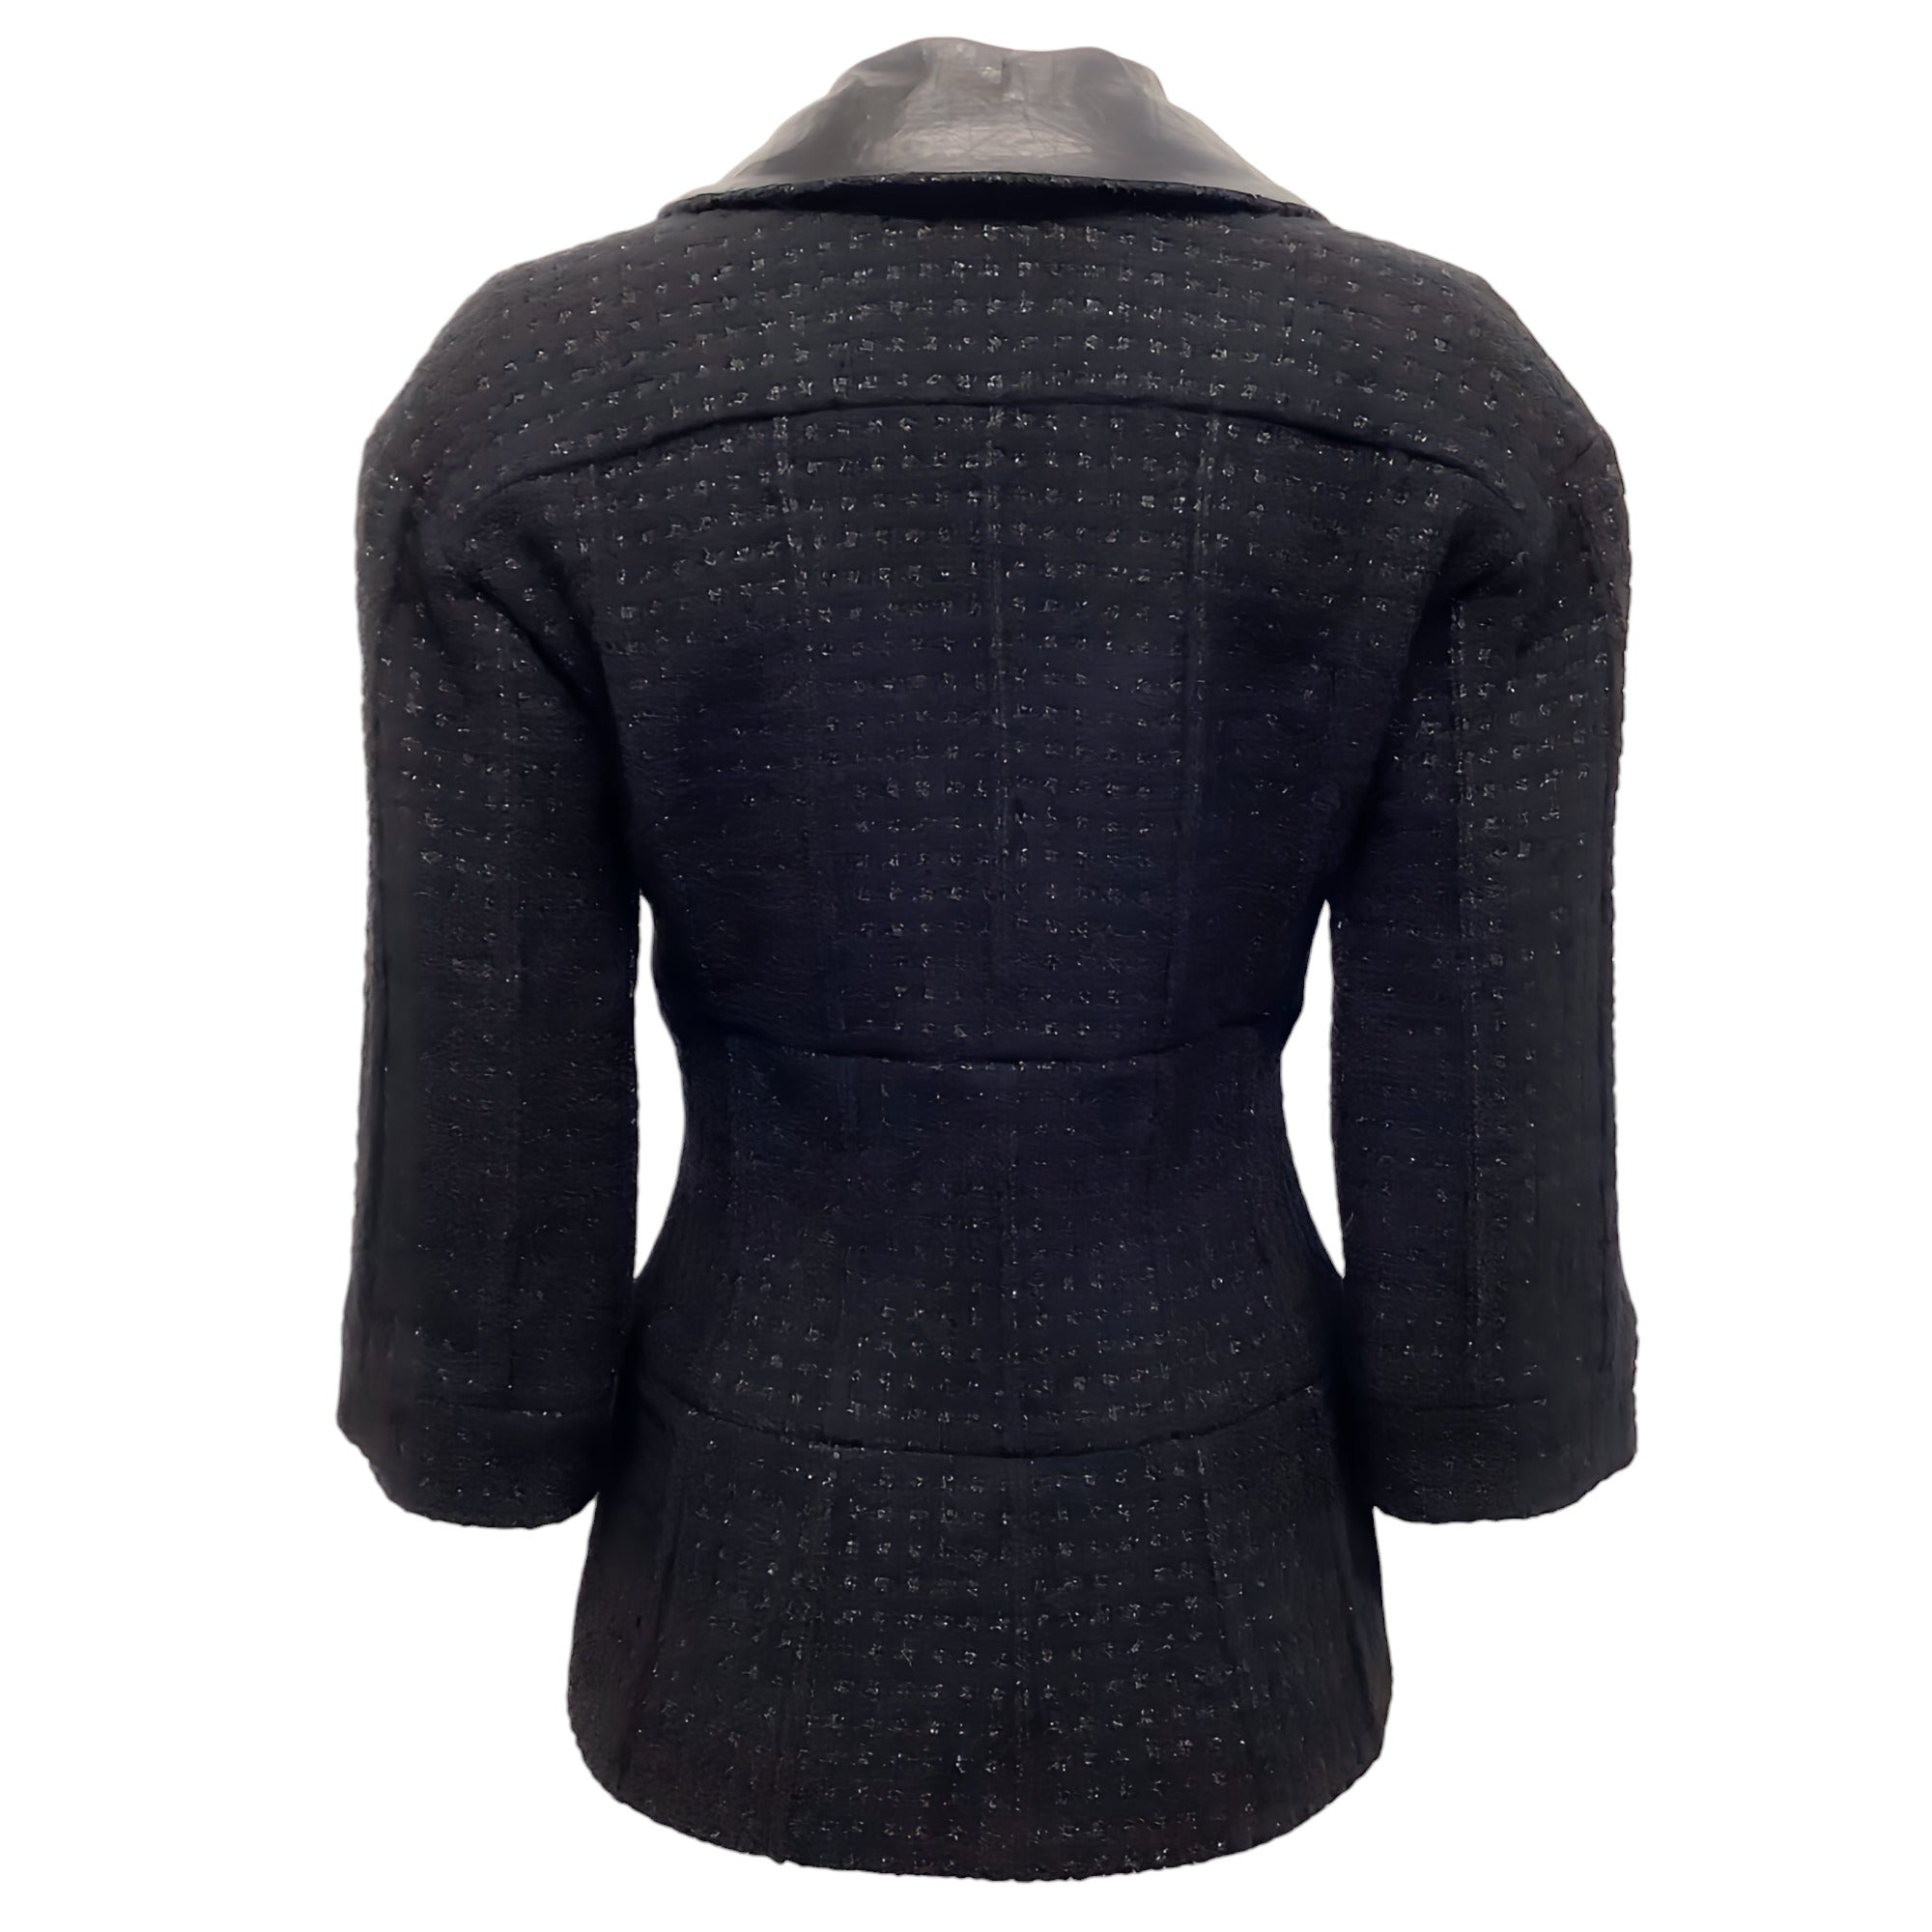 Chanel Black Boucle Jacket with Leather Collar